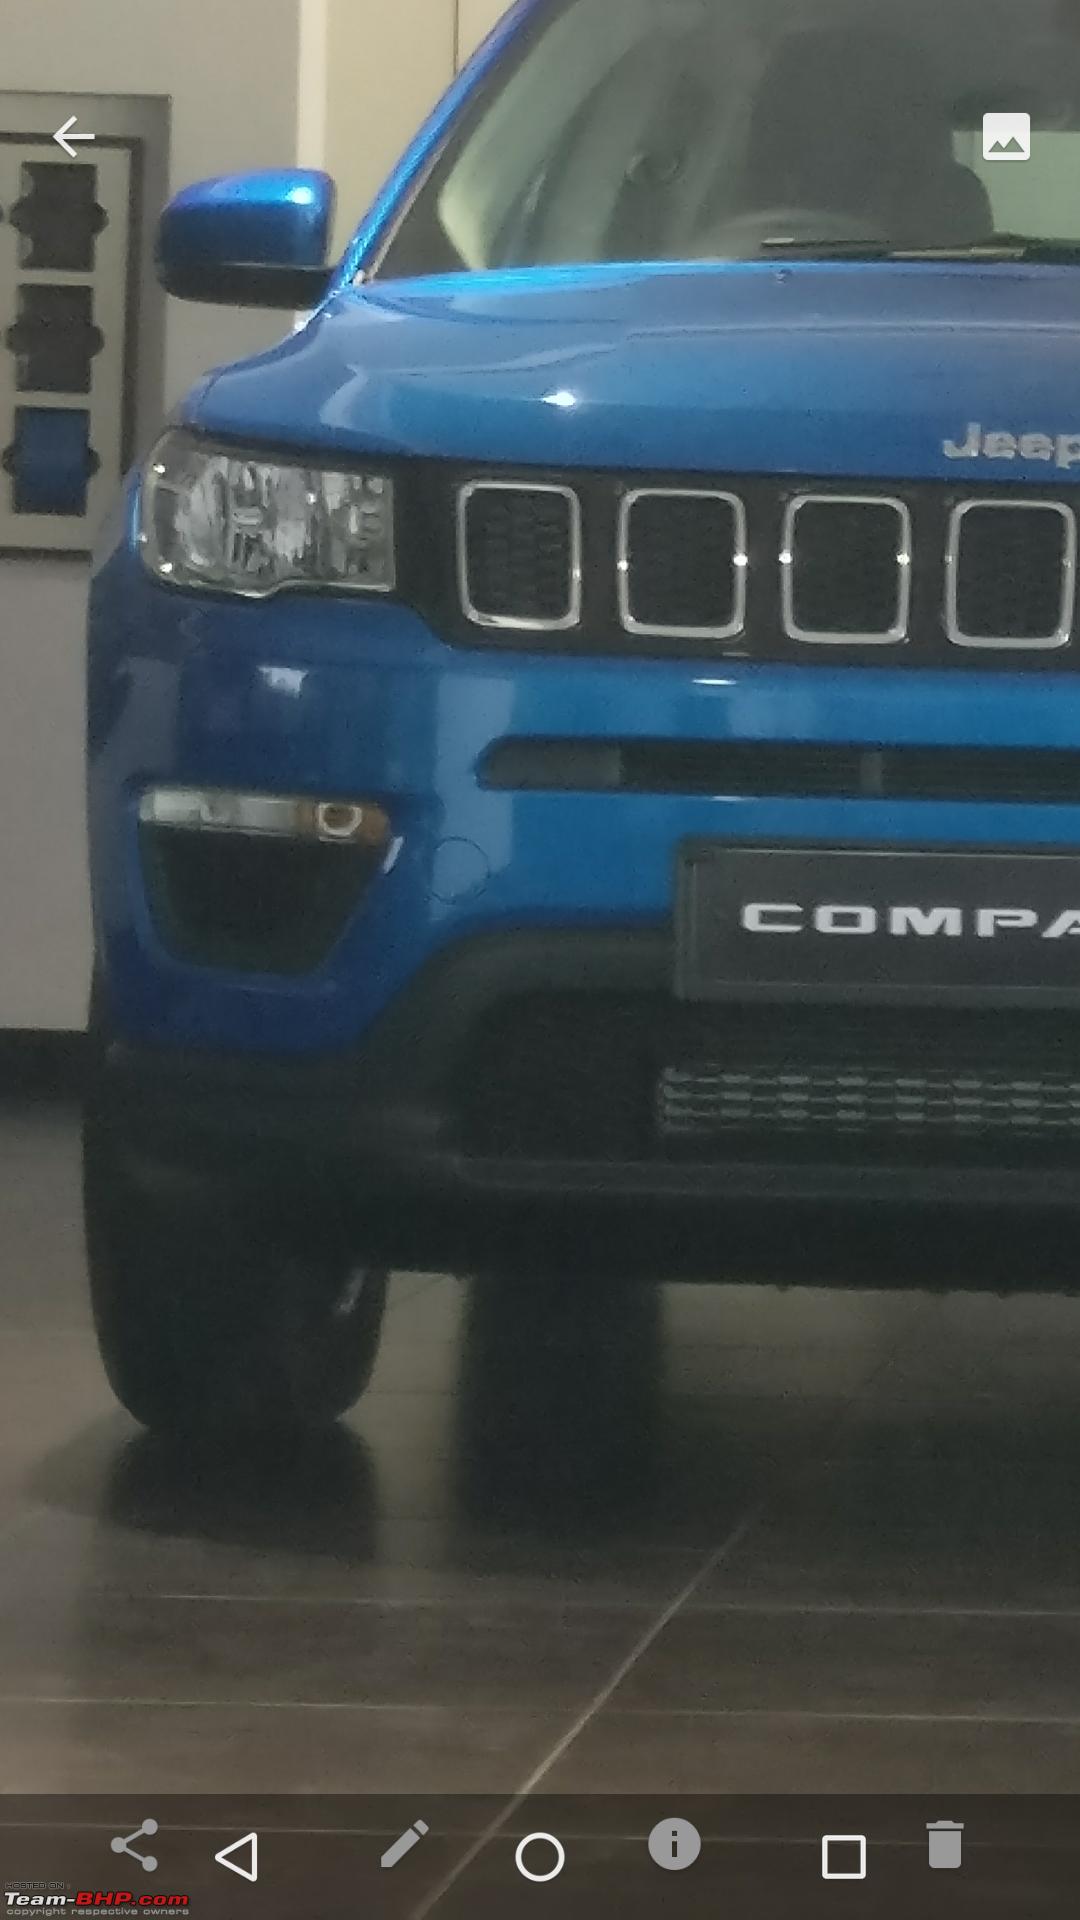 New Jeep® Compass, born to surprise, Jeep